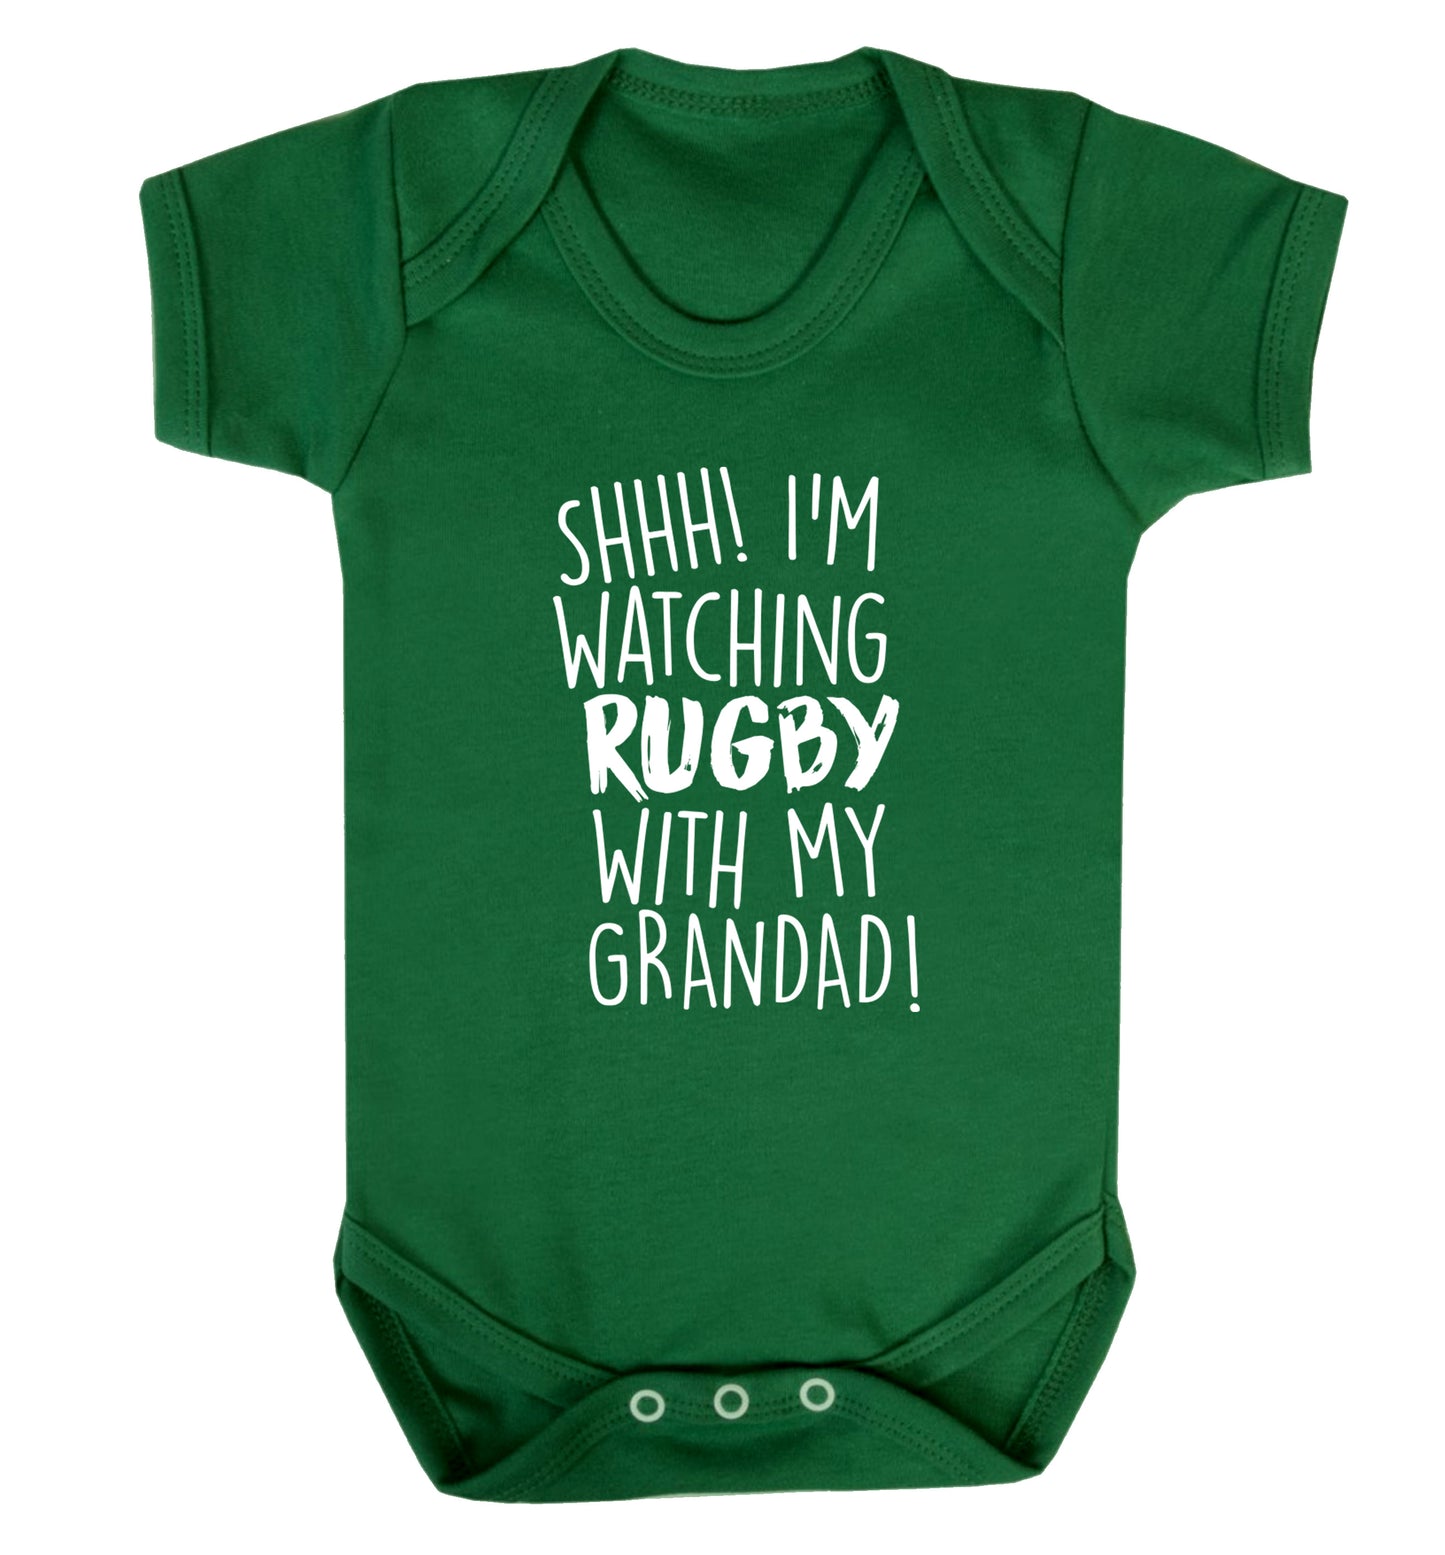 Shh I'm watching rugby with my grandaughter Baby Vest green 18-24 months